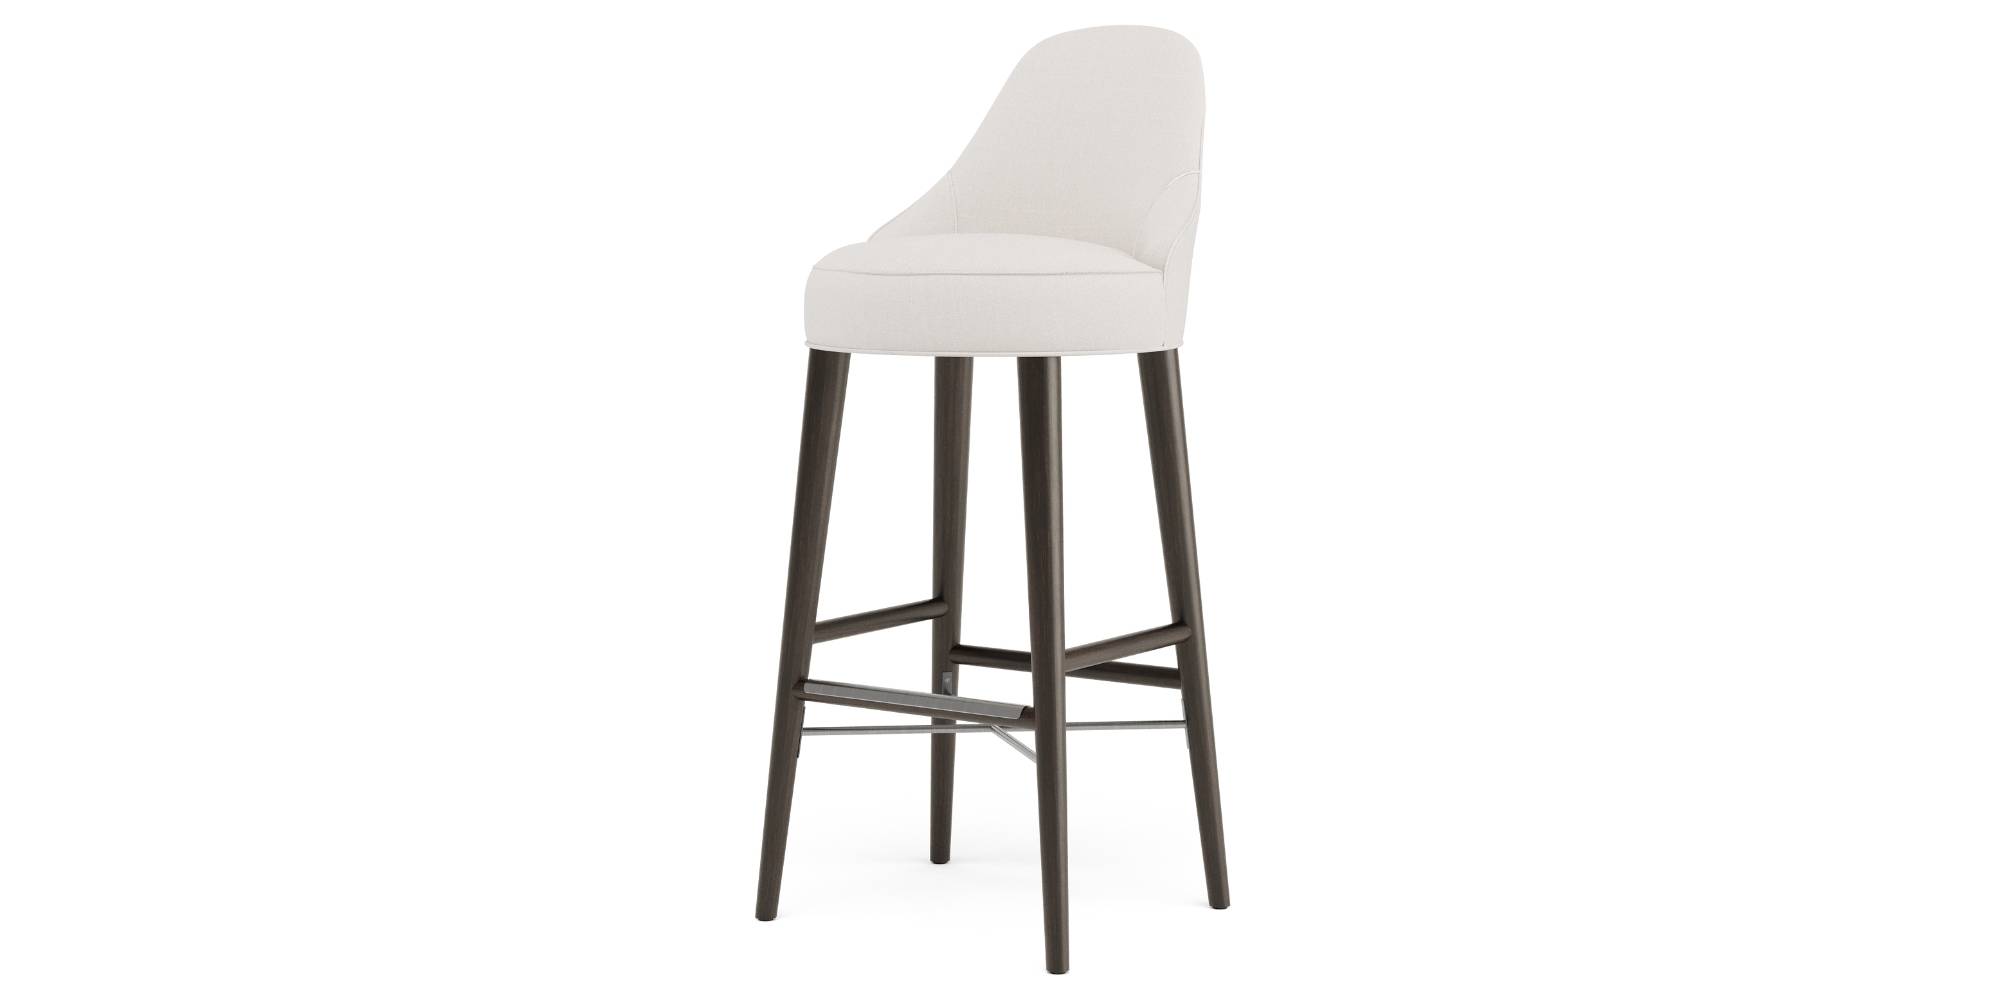 Coronet Bar Stool – Upholstered Back in Outdoor Bar Stools for Coronet collection